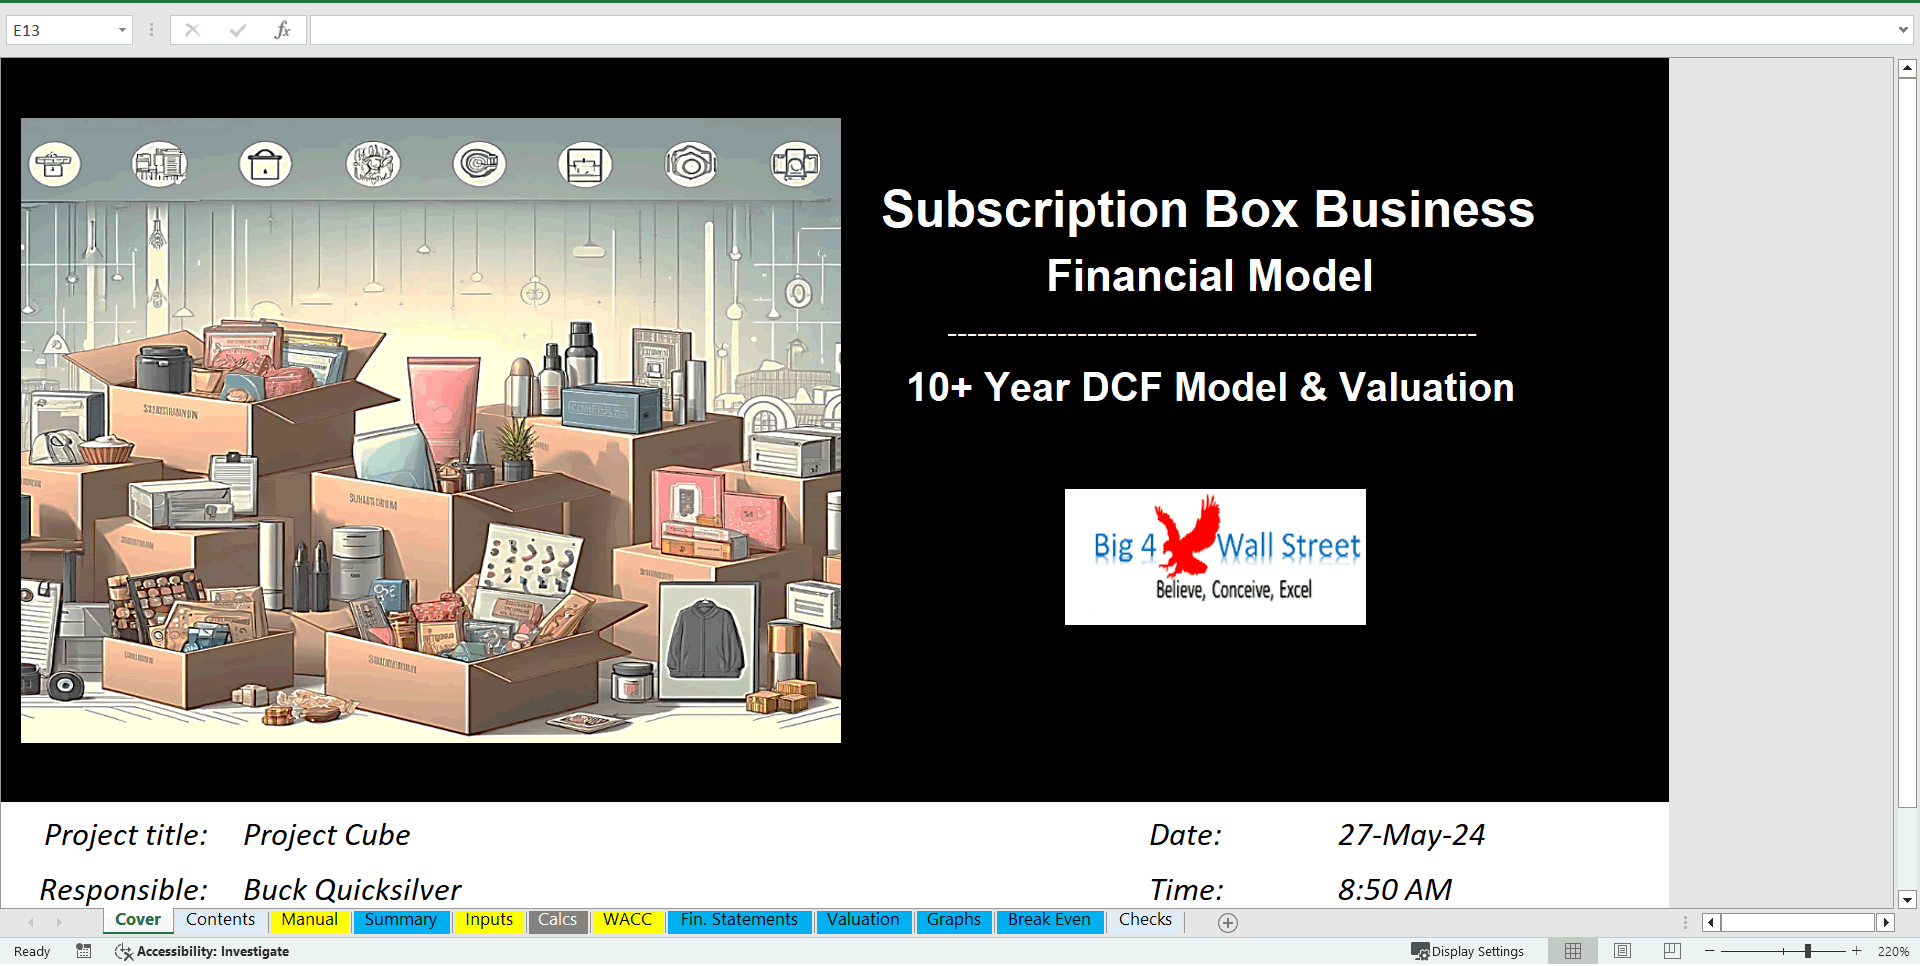 Subscription Box Business Financial Model (10 Year DCF Valuation)